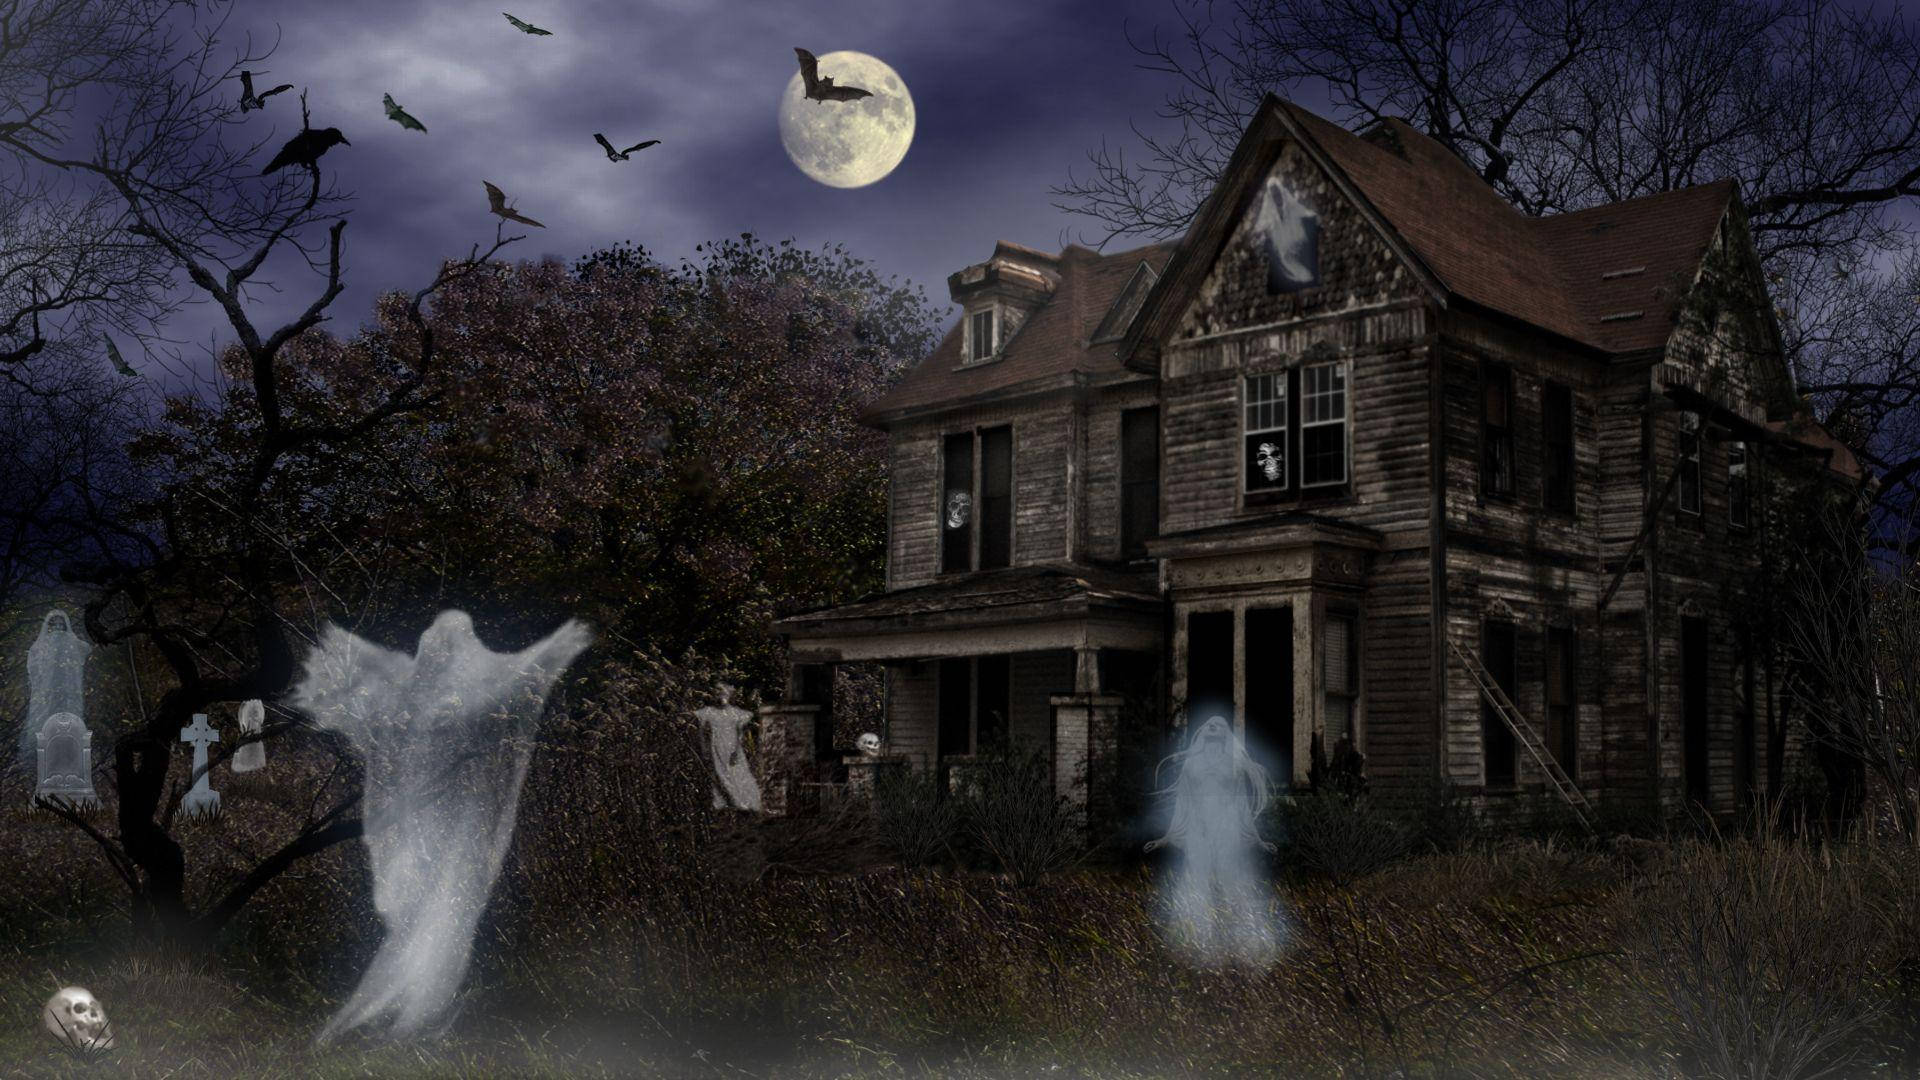 Trick or Treat? Make your Halloween fun and memorable by visiting a Haunted House! Wallpaper